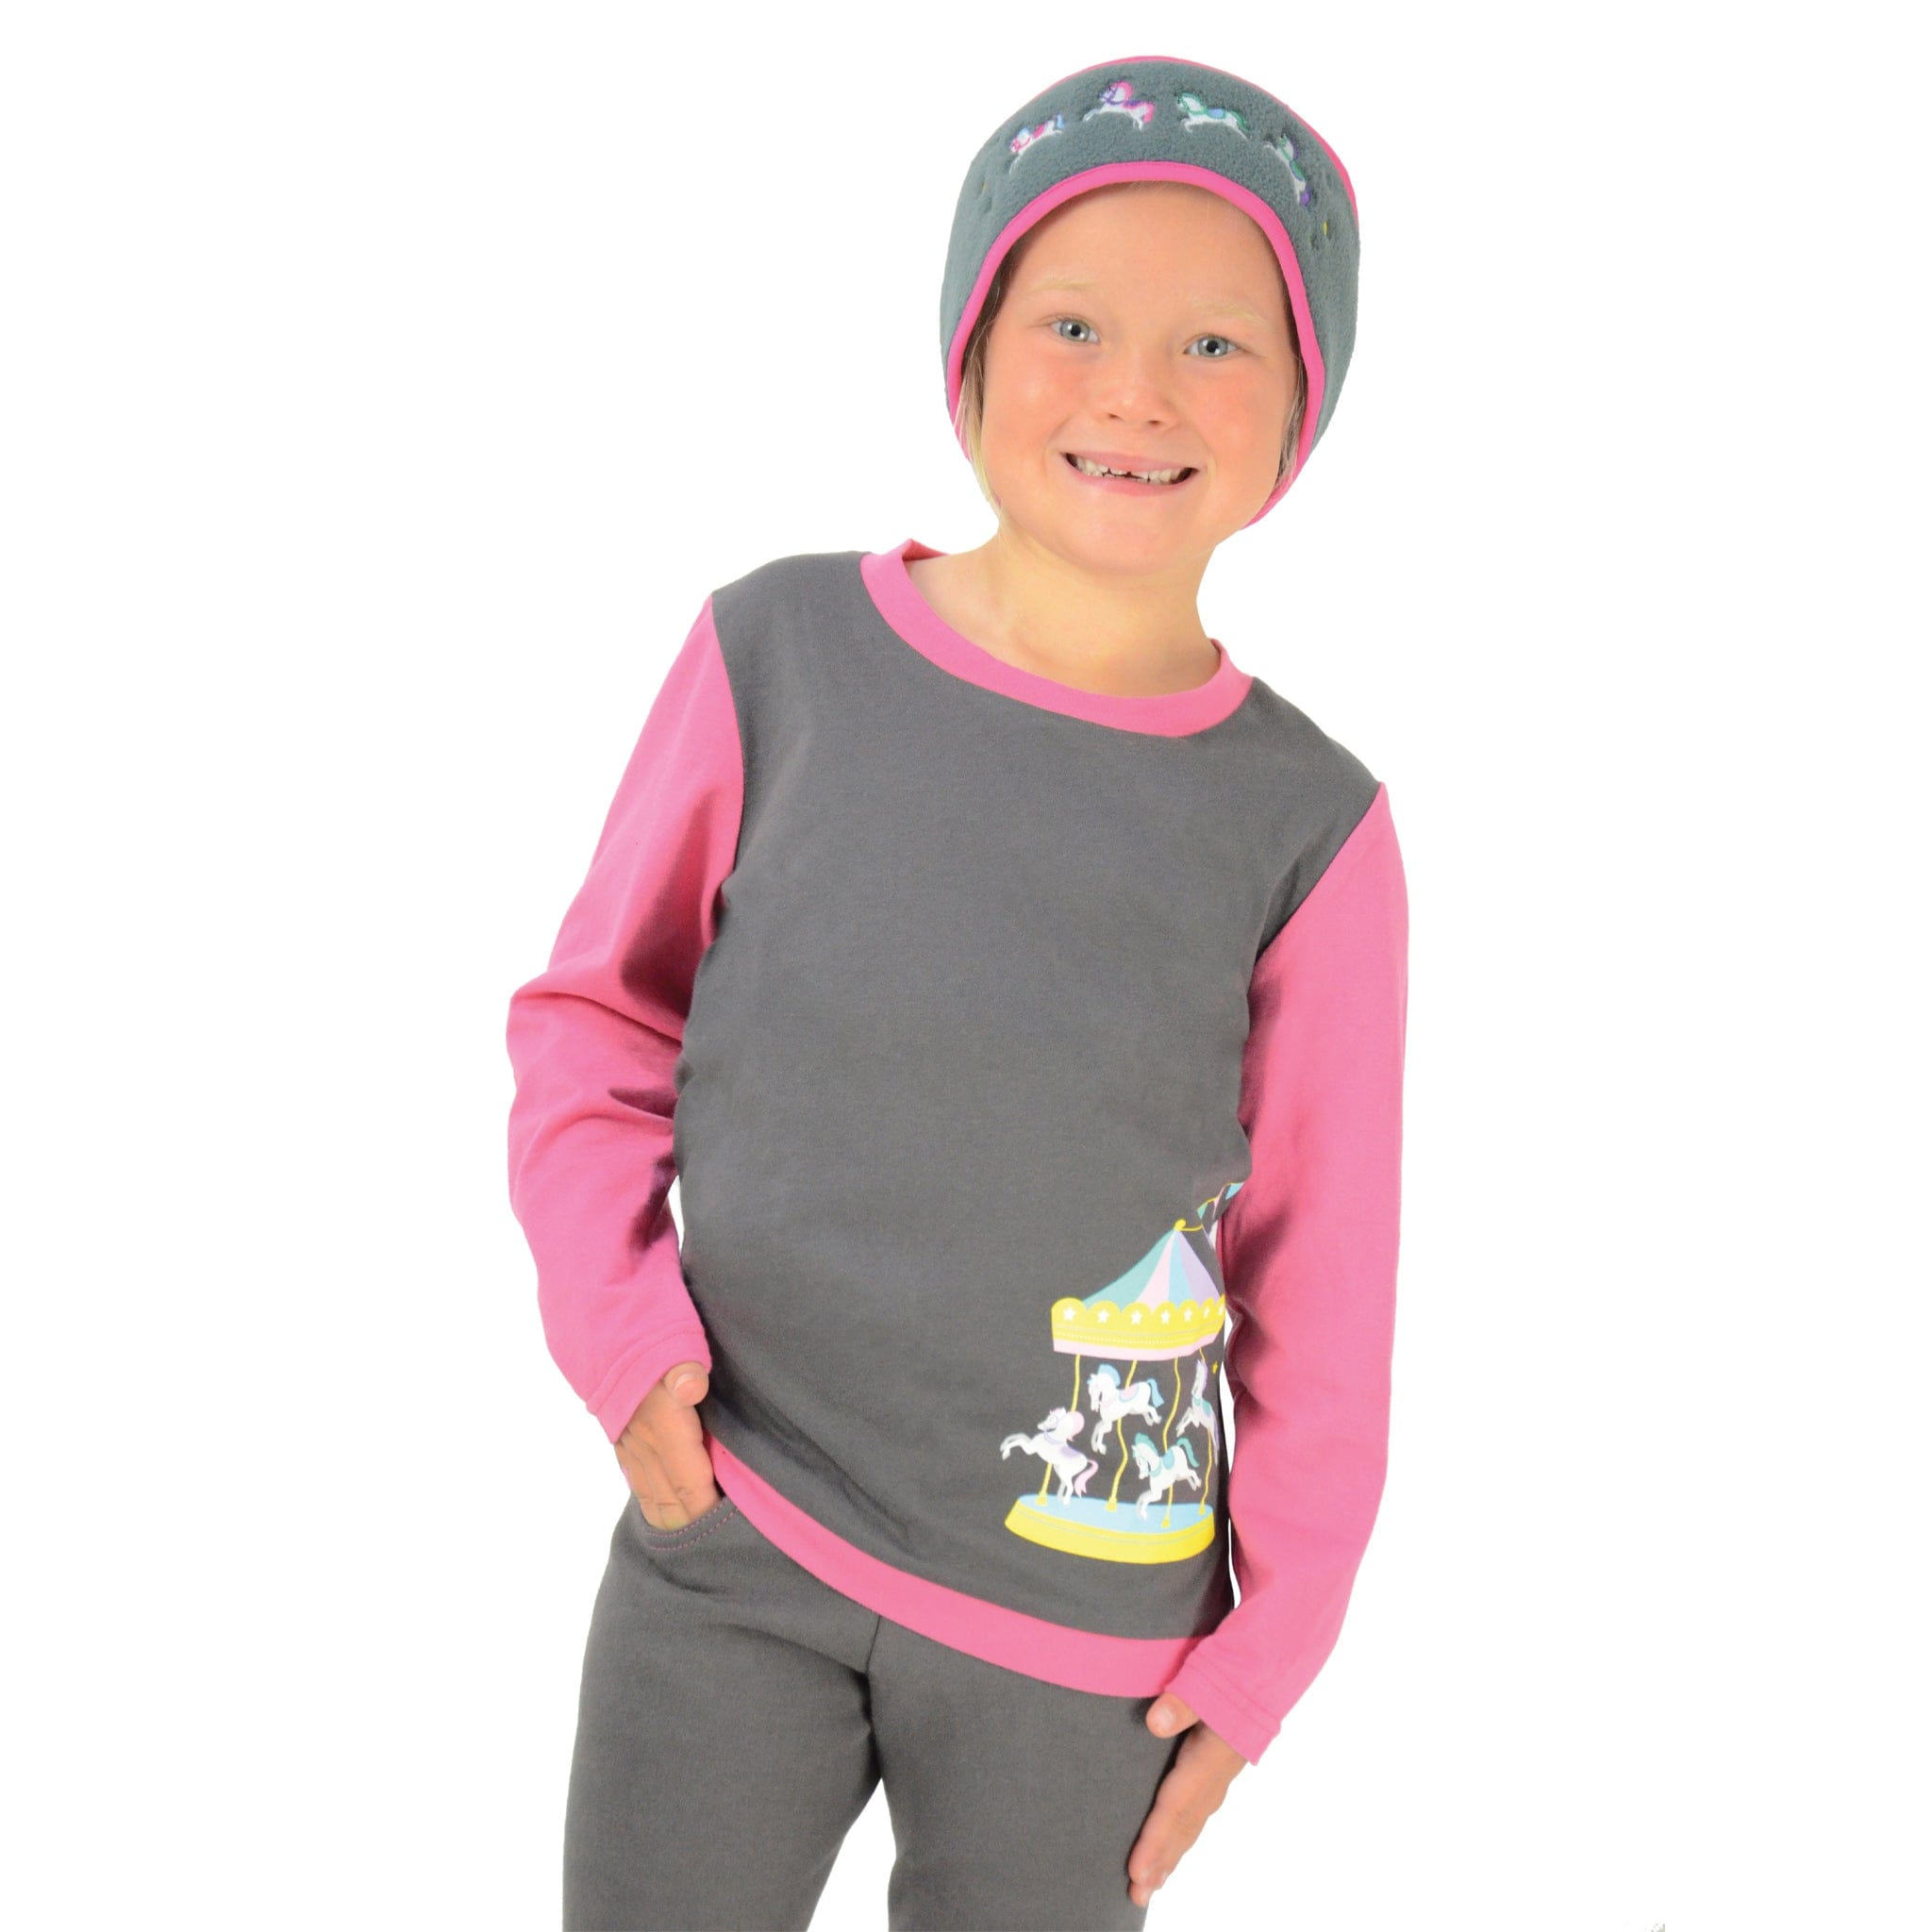 Hy Children's Little Rider Merry Go Round Long Sleeve T-Shirt 29634 Grey and Pink Front View